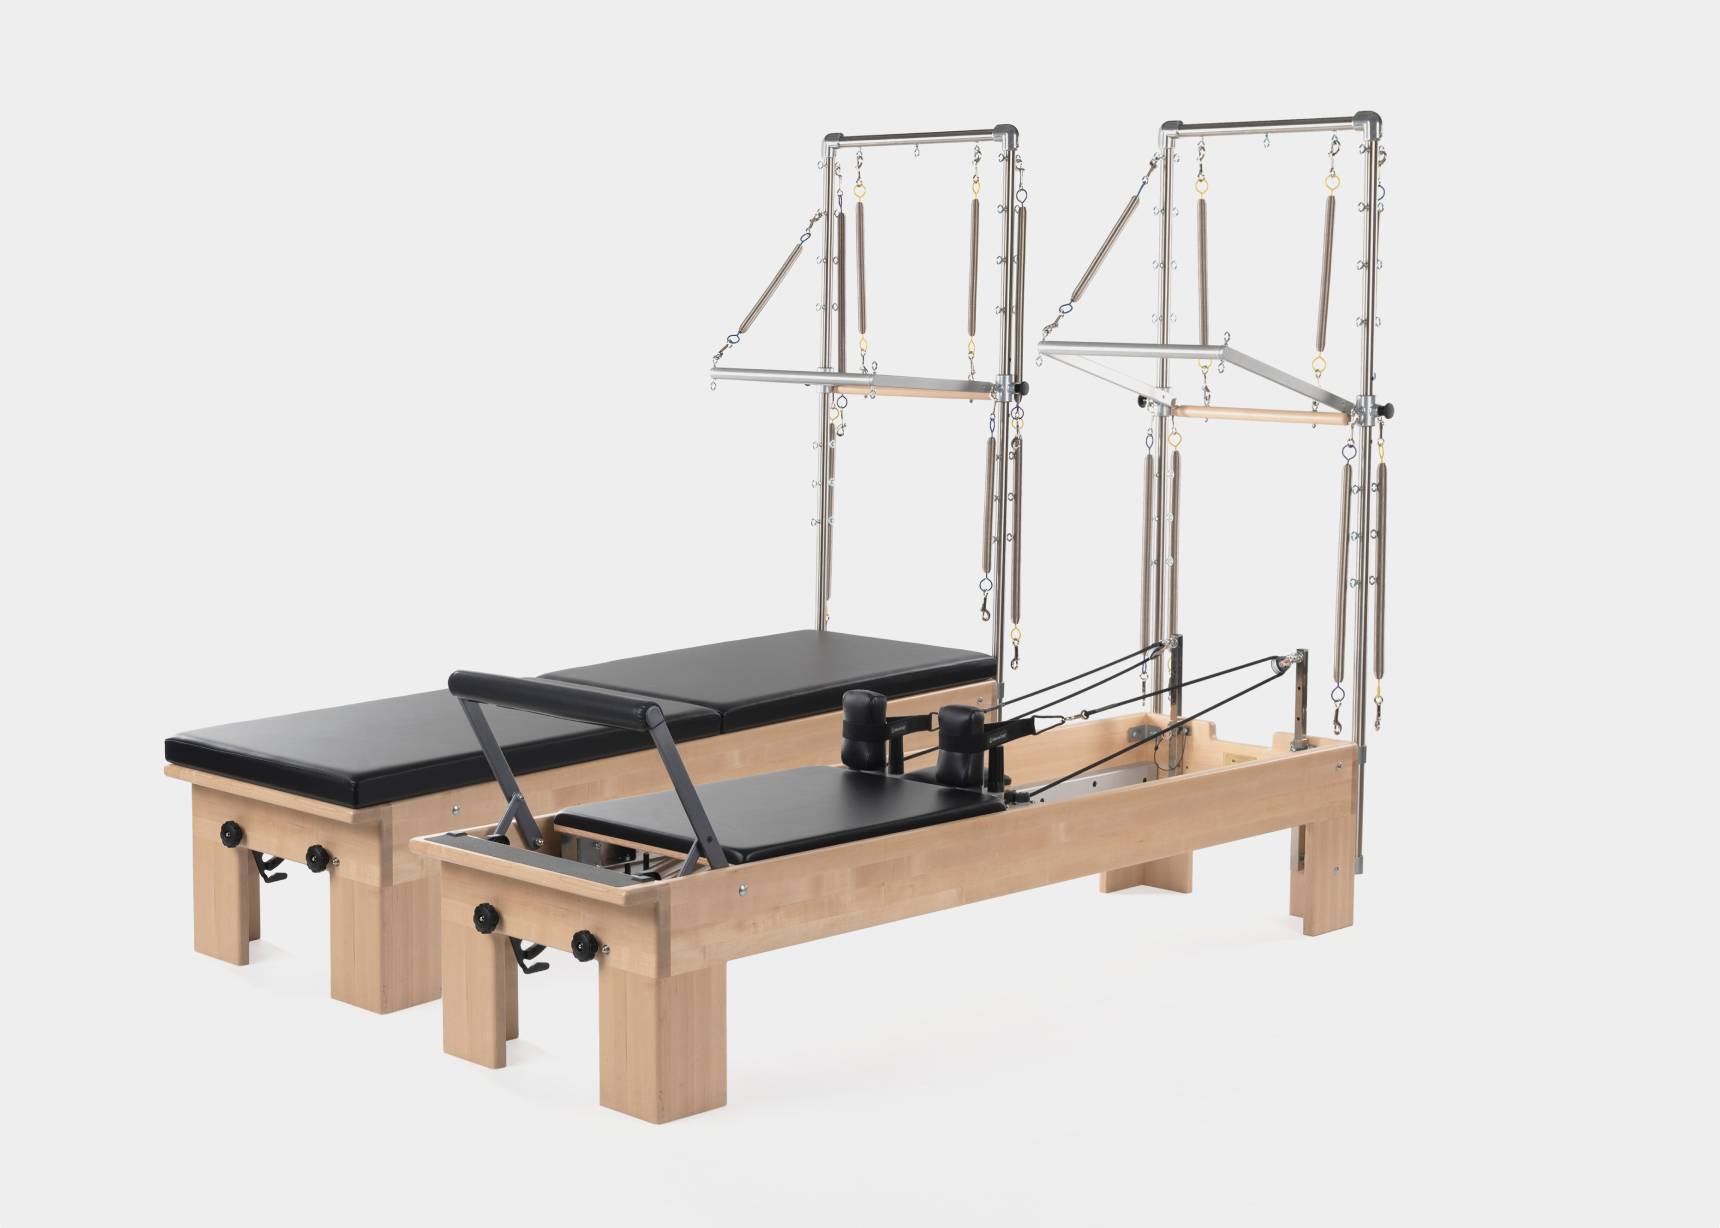 Tower Retrofit Kit for Studio Reformer and Clinical Reformer full photo